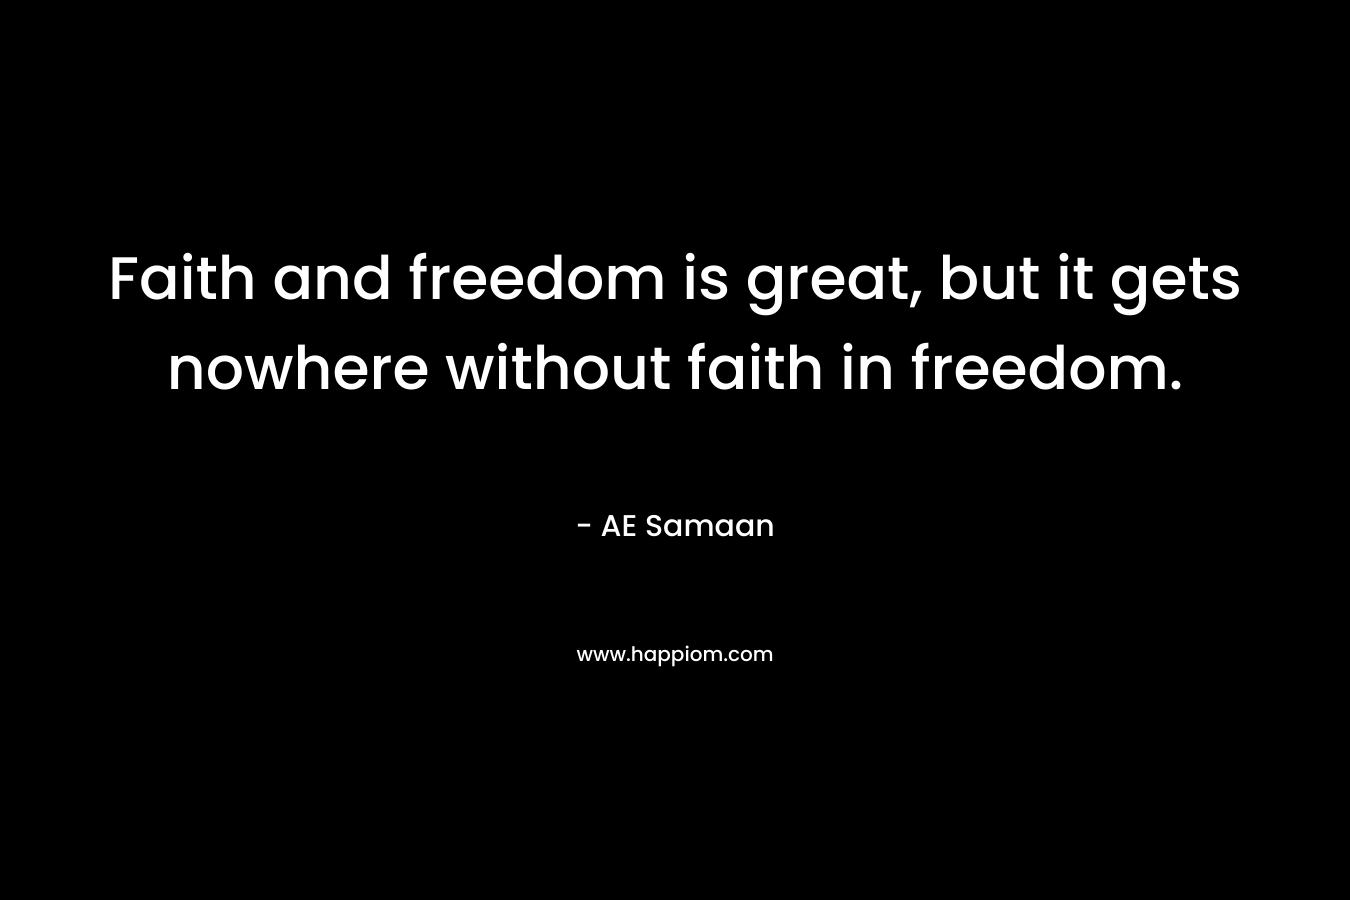 Faith and freedom is great, but it gets nowhere without faith in freedom.